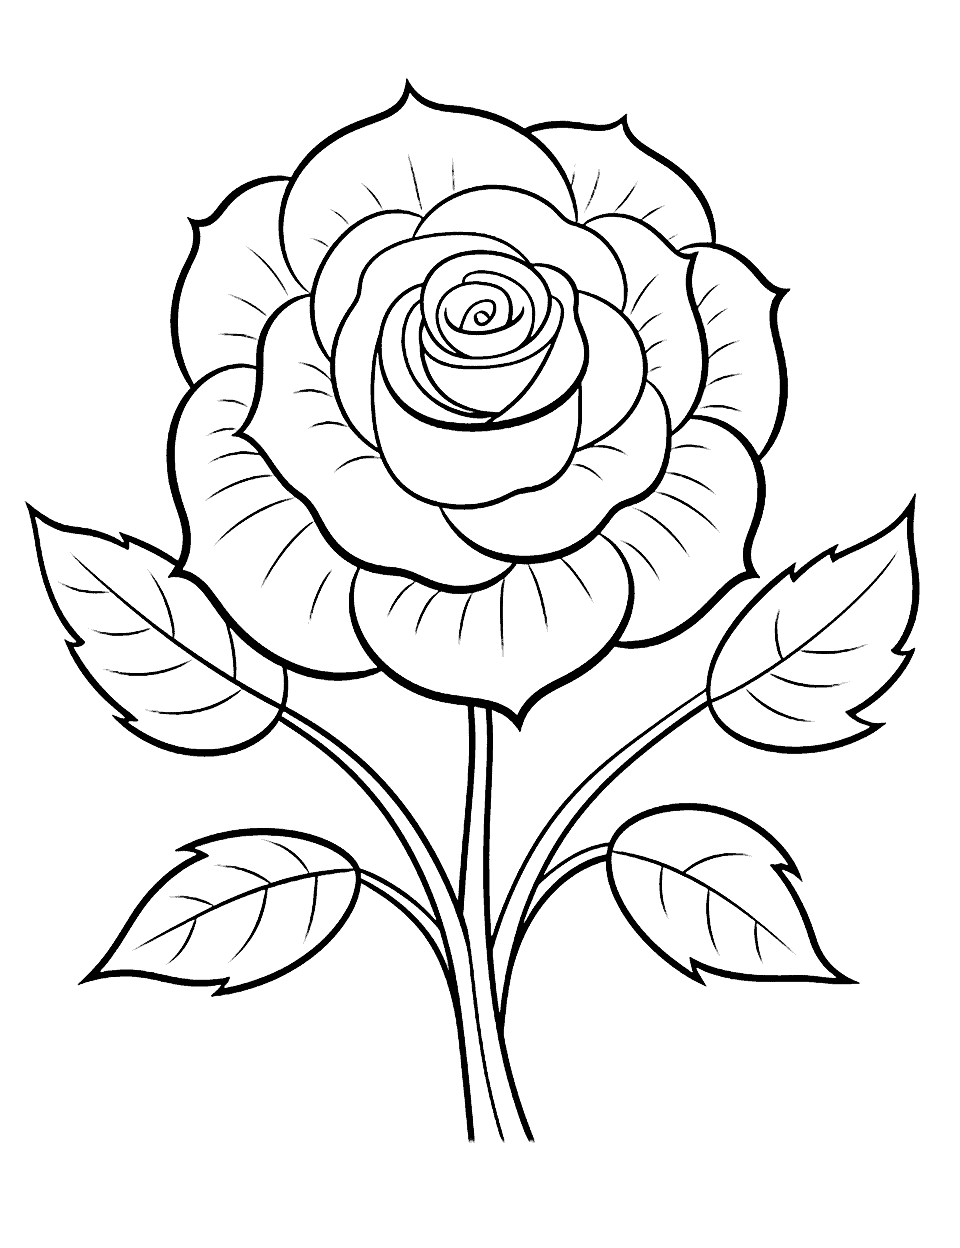 Large, Easy Rose Flower Coloring Page - A large, easy-to-color rose perfect for beginners.